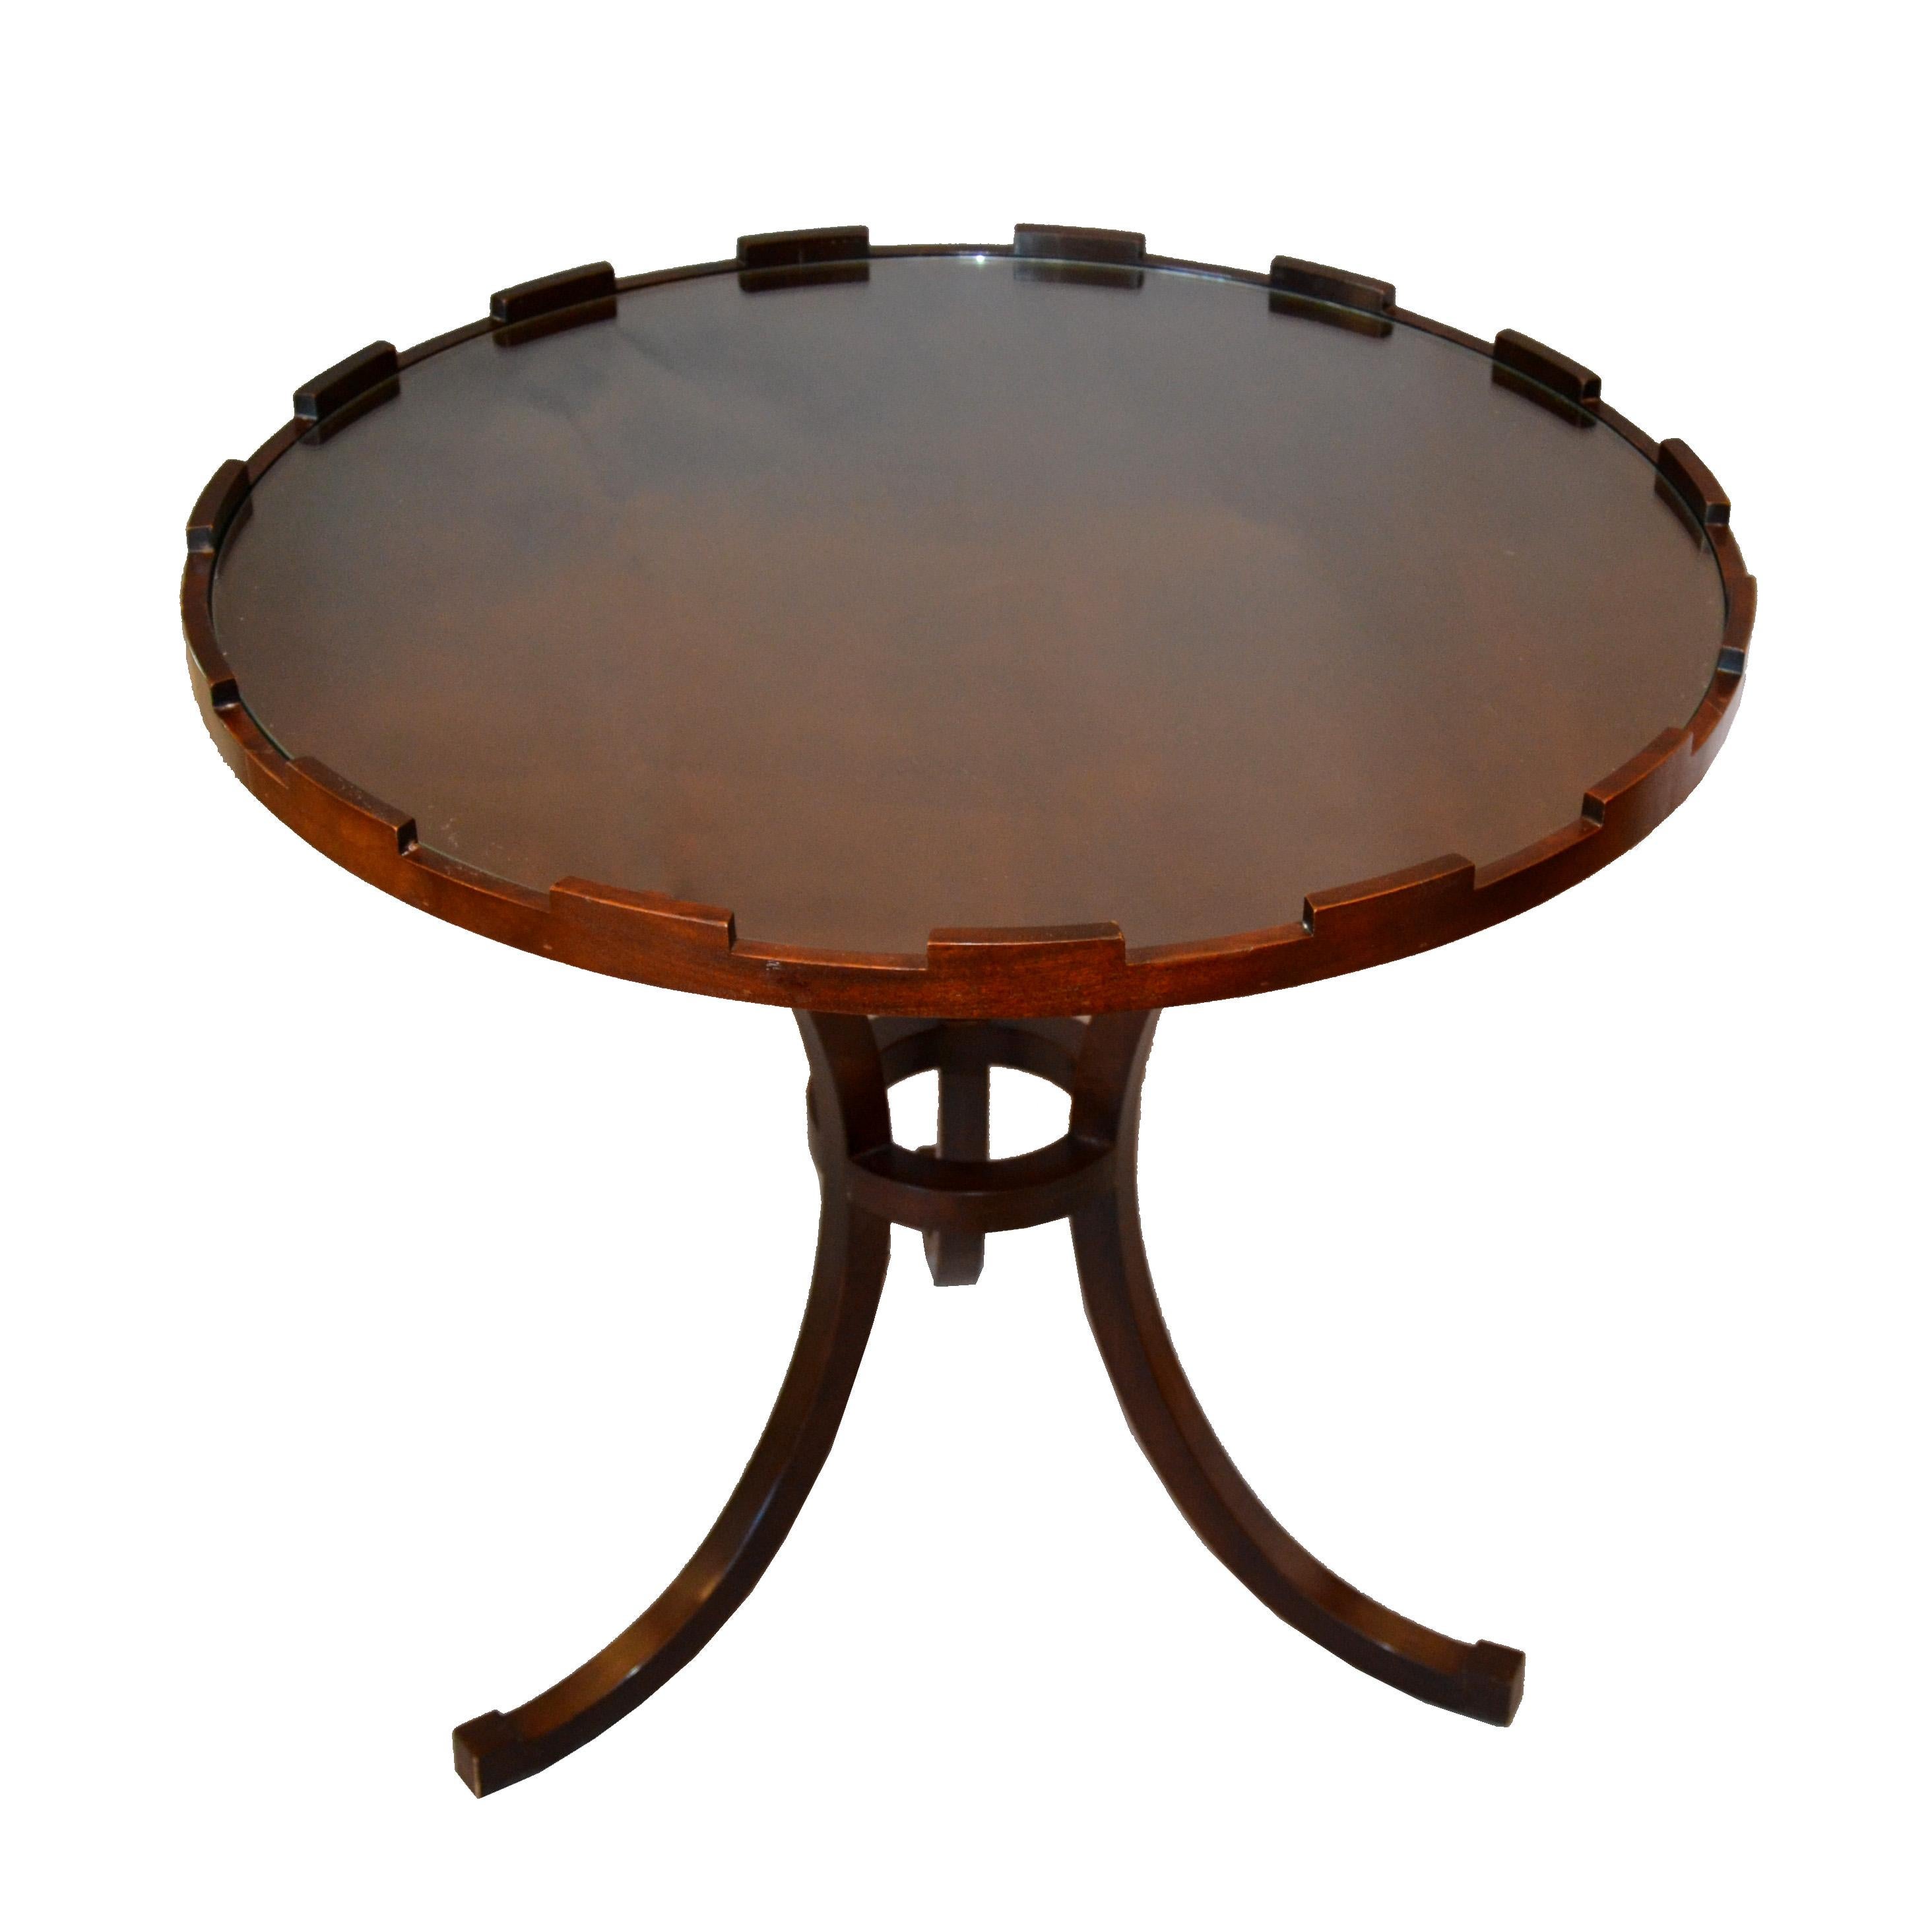 Round walnut side table with glass top by baker.
The baker metal tag is attached under the top.
Can be used as a side or as a cocktail table.